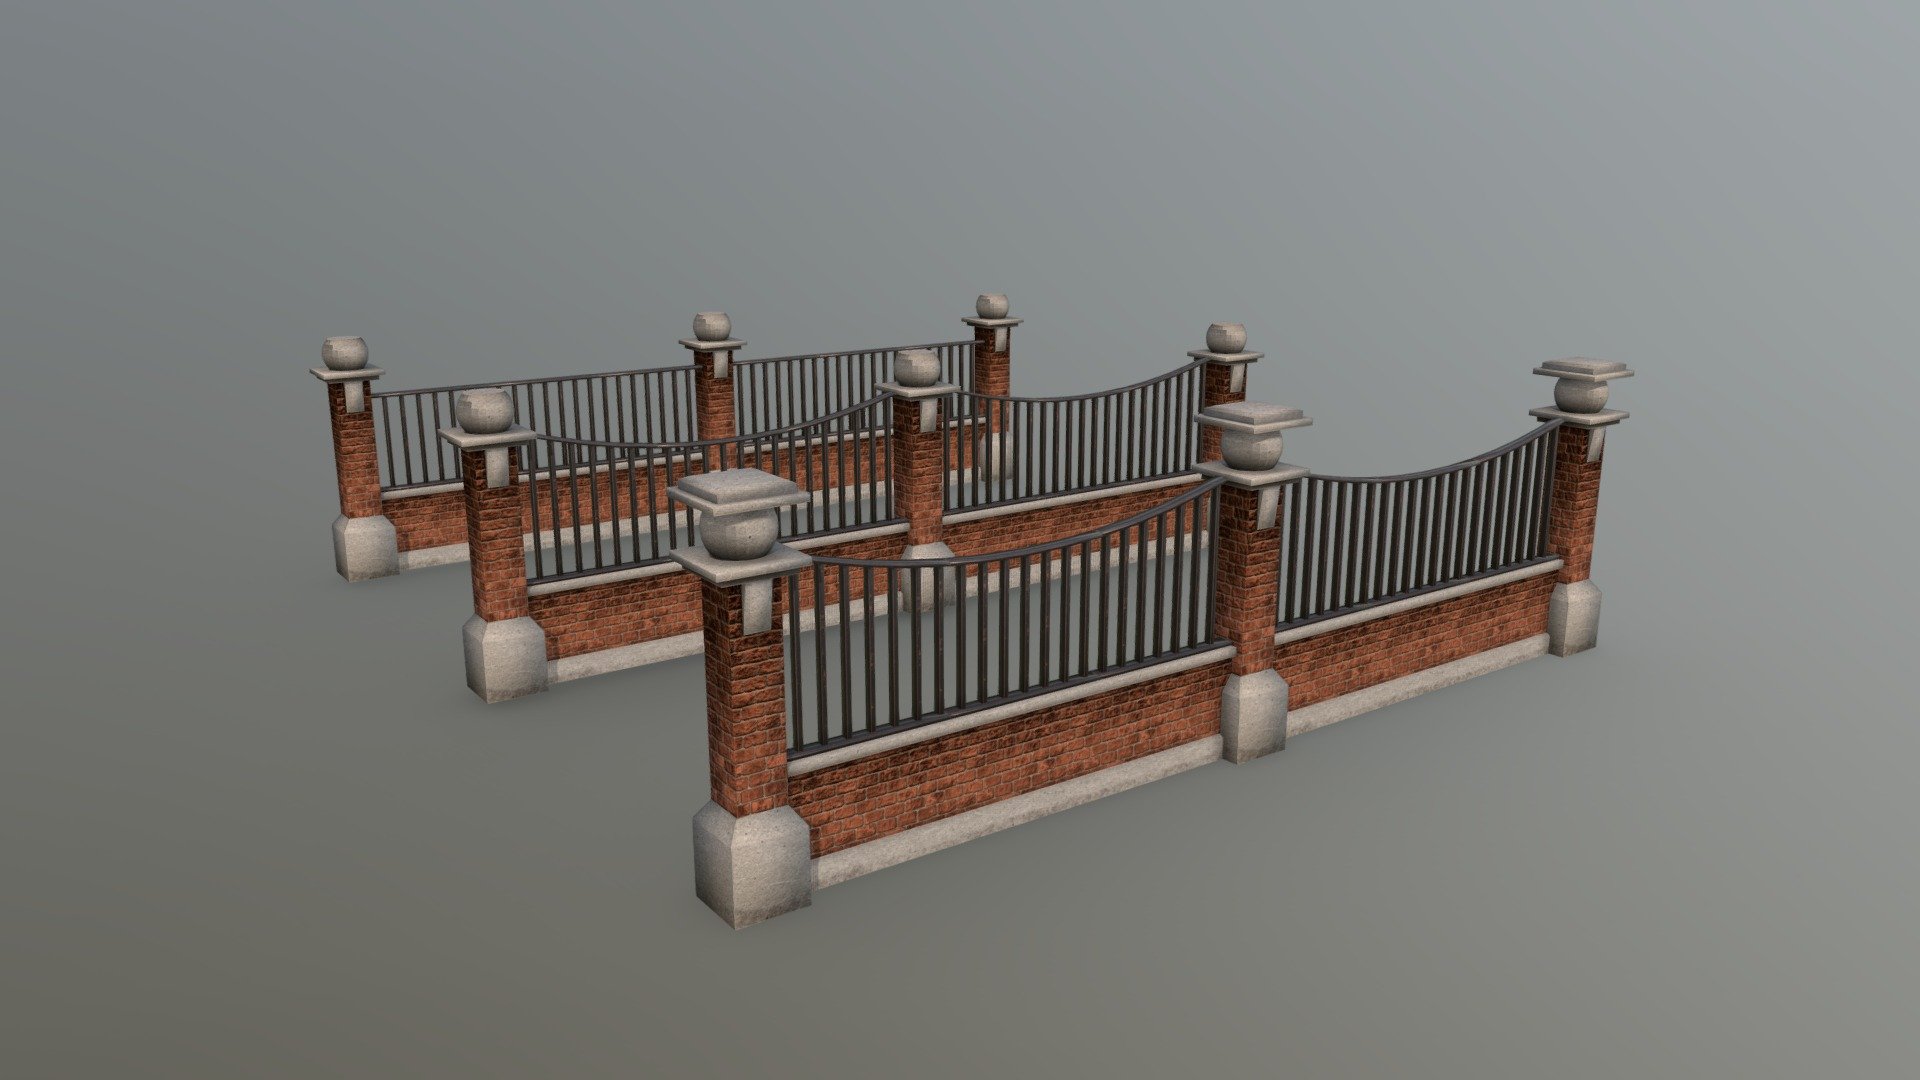 A set of fence designs for a Unity game im working on 3d model